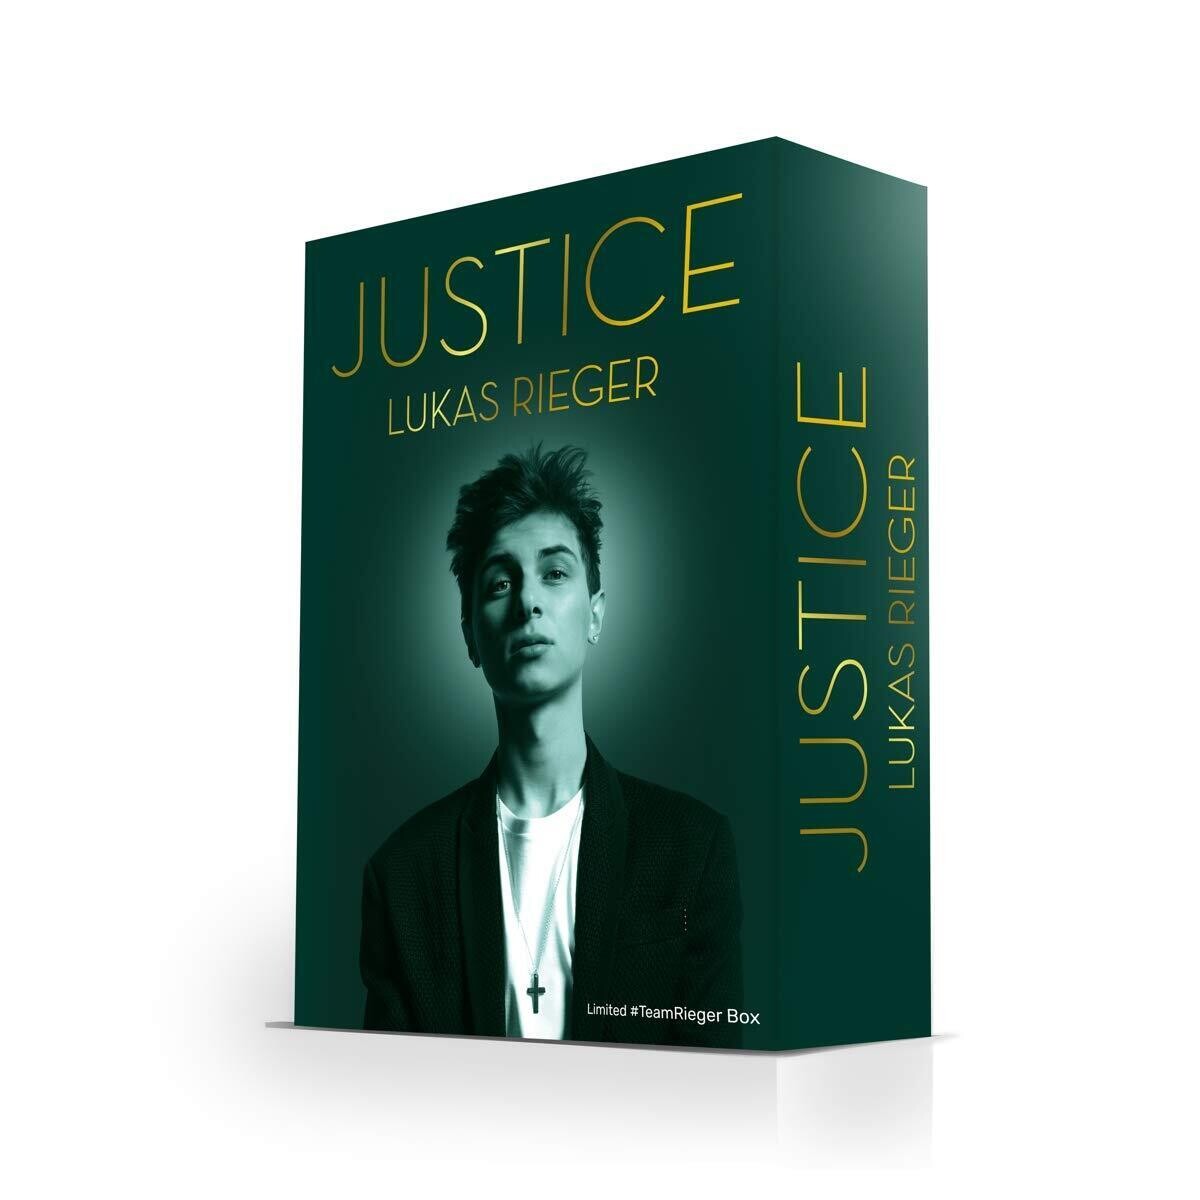 Lukas Rieger - Justice (Limited #TeamRieger Box)(2019) CD